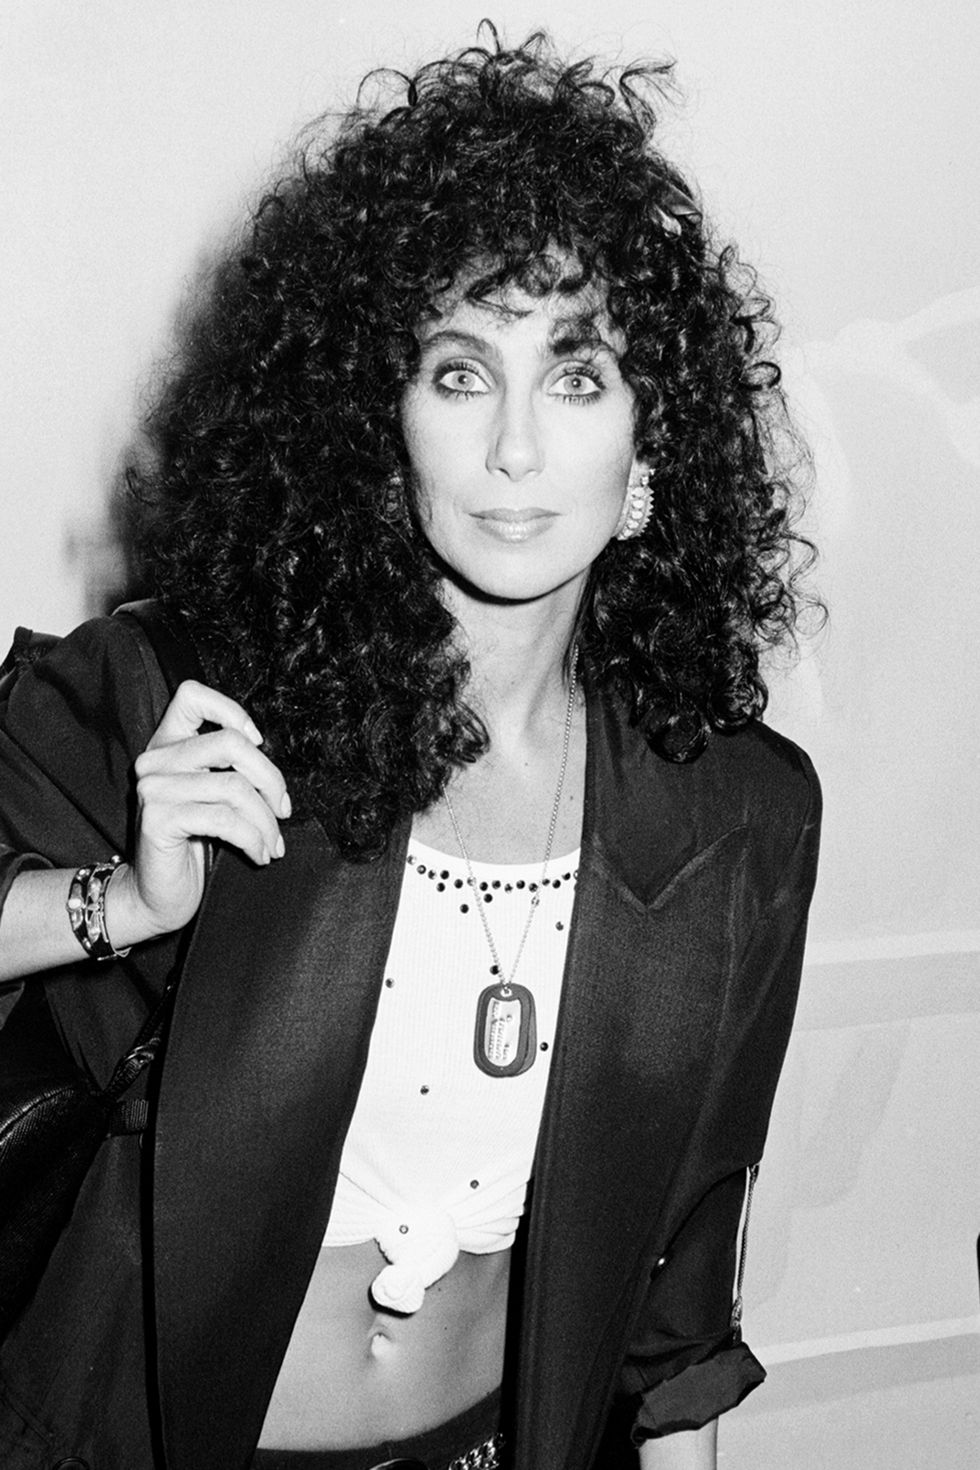 UNITED STATES - MAY 01:  Cher Bono  (Photo by The LIFE Picture Collection/Getty Images)